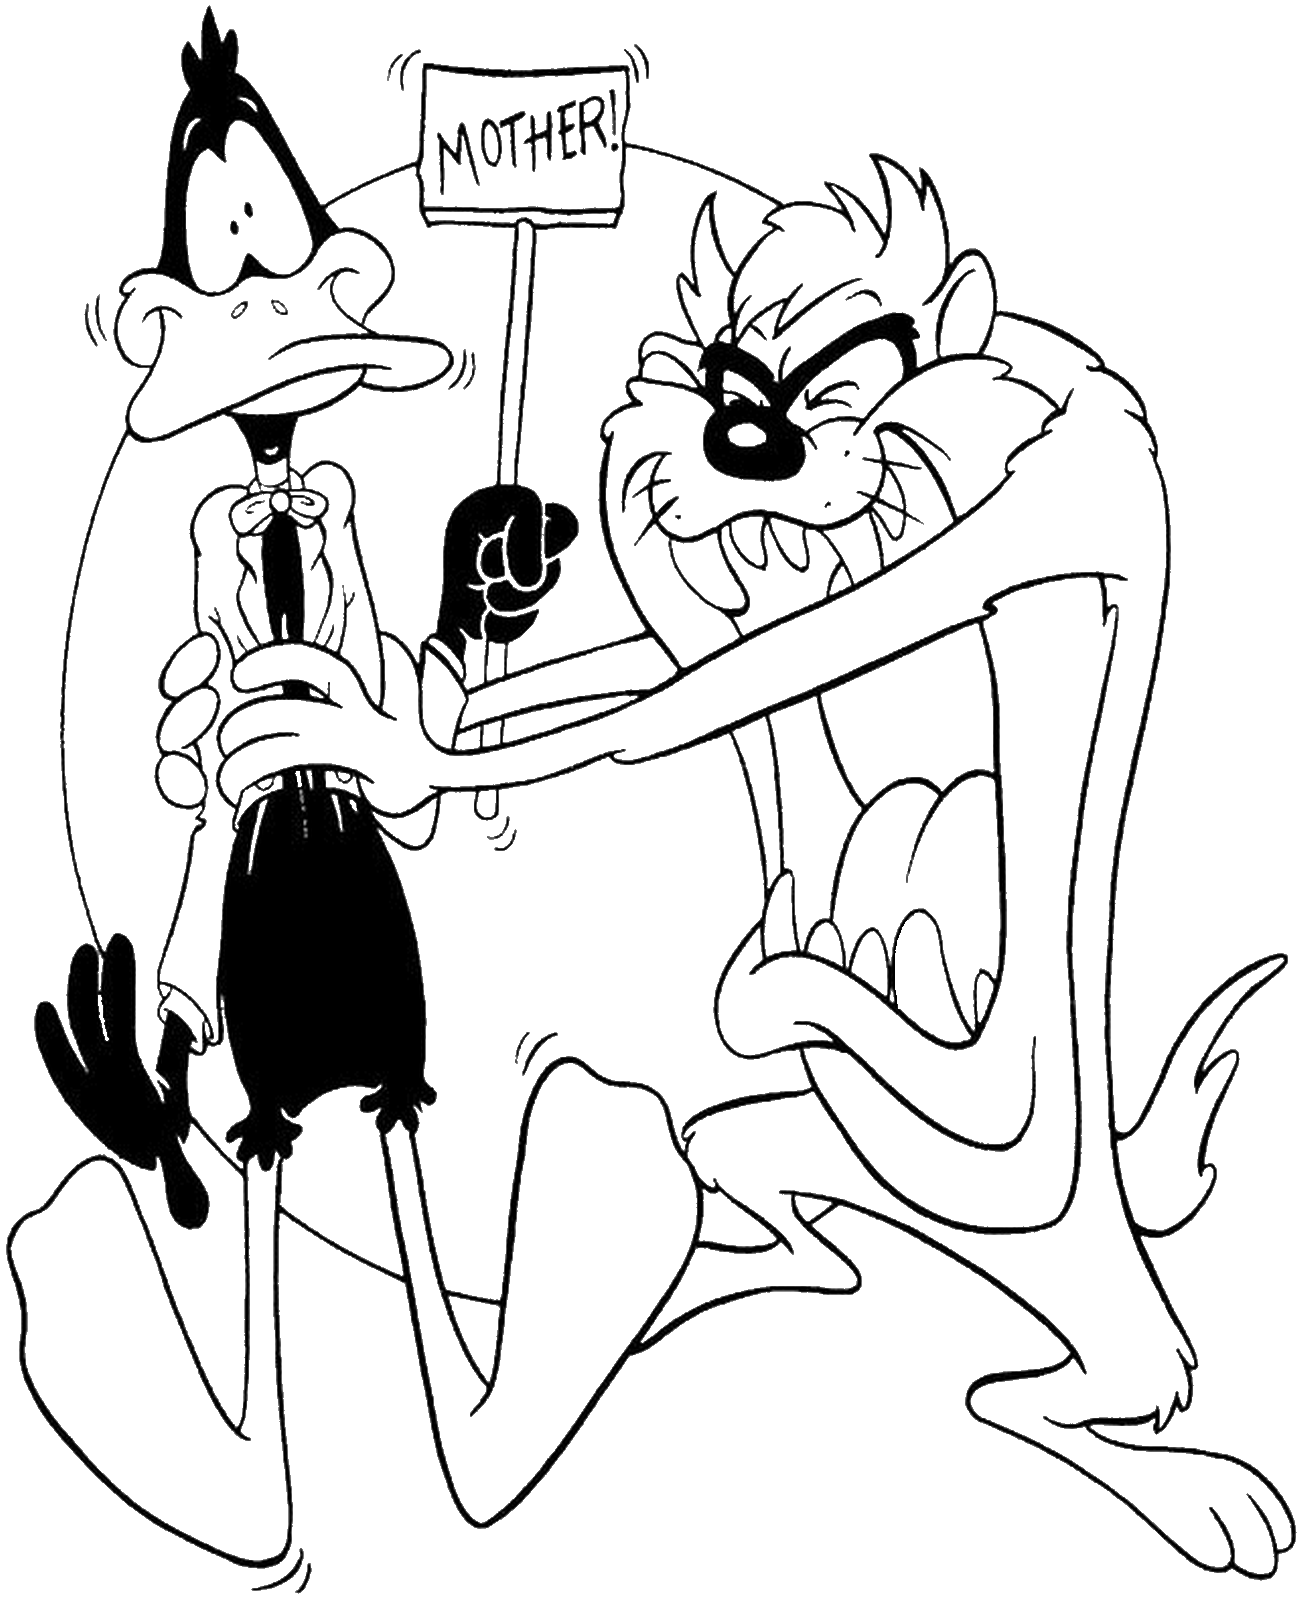 Taz-Mania Coloring Pages